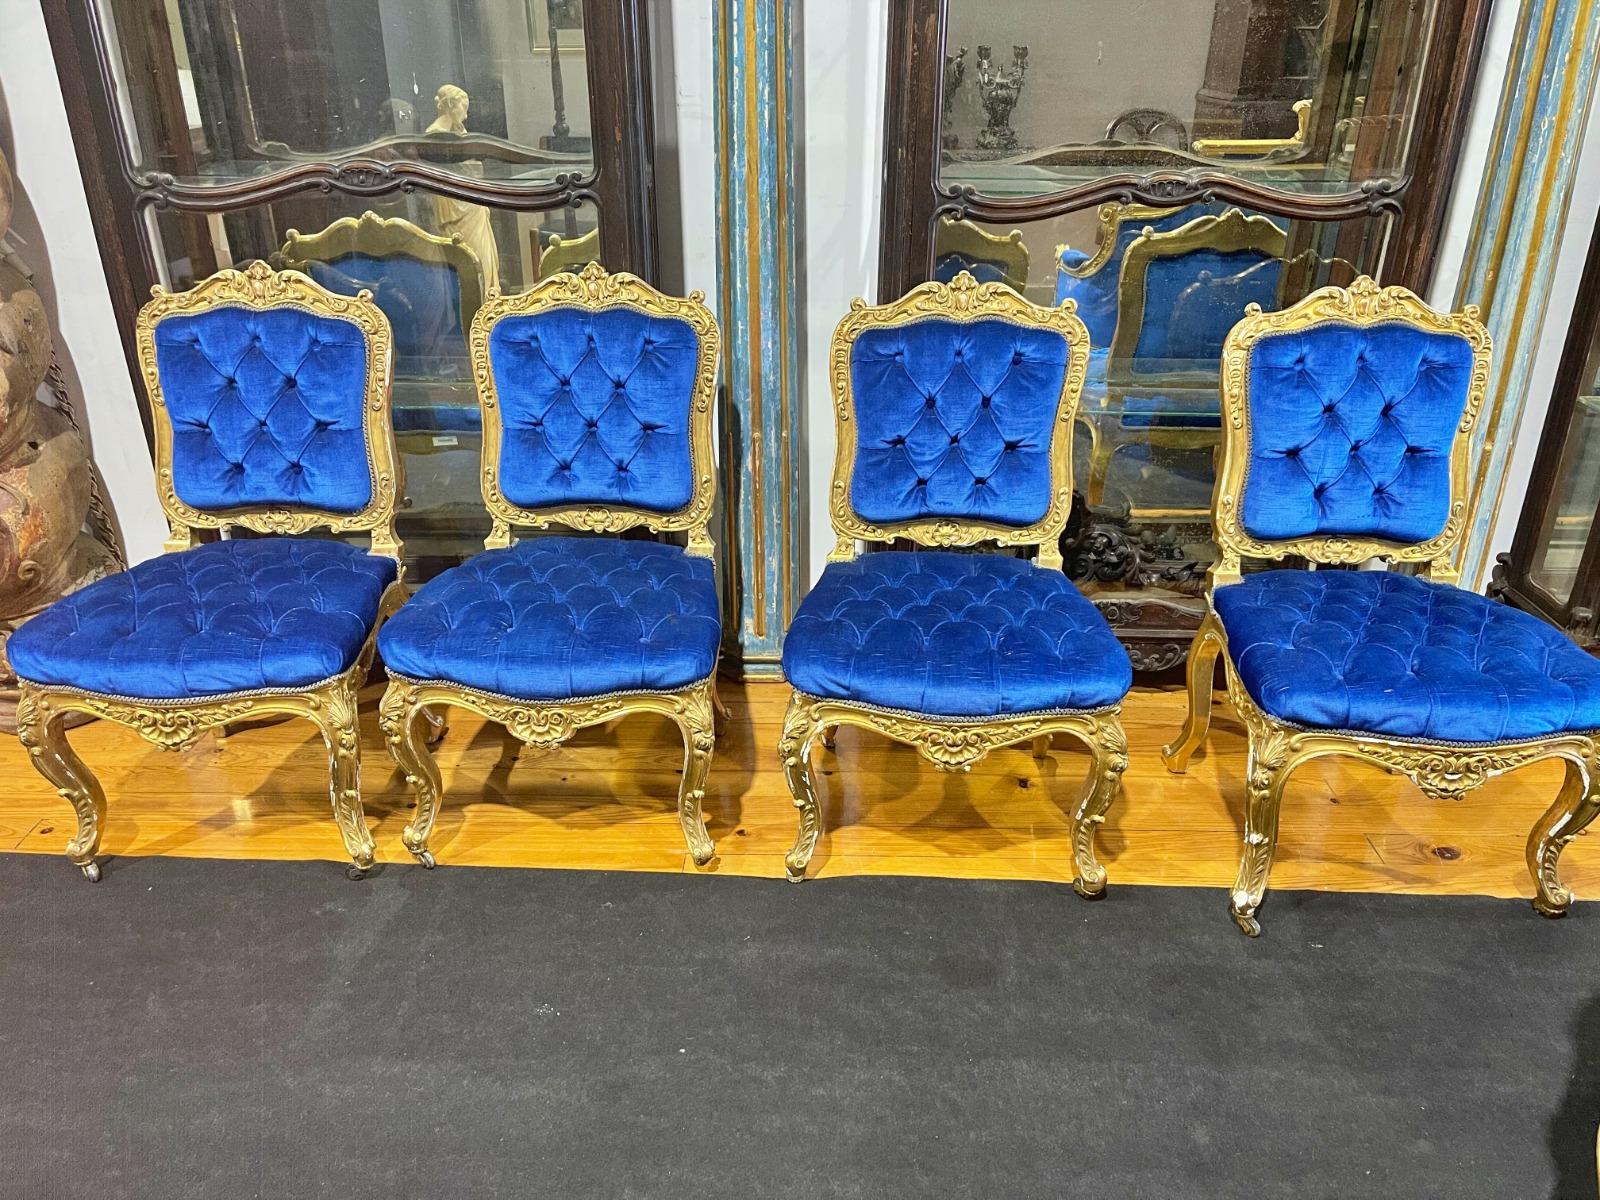 Title: Set of sofa and 4 chairs
Date/Period: XIX century
Dimension: Dim.: (Canapé) 110 x 201 x 70 cm. Dim.: (Chair) 94 x 50 x 50 cm.
Materials: made in carved and gilded wood
Additional information: French, 19th century, made in carved and